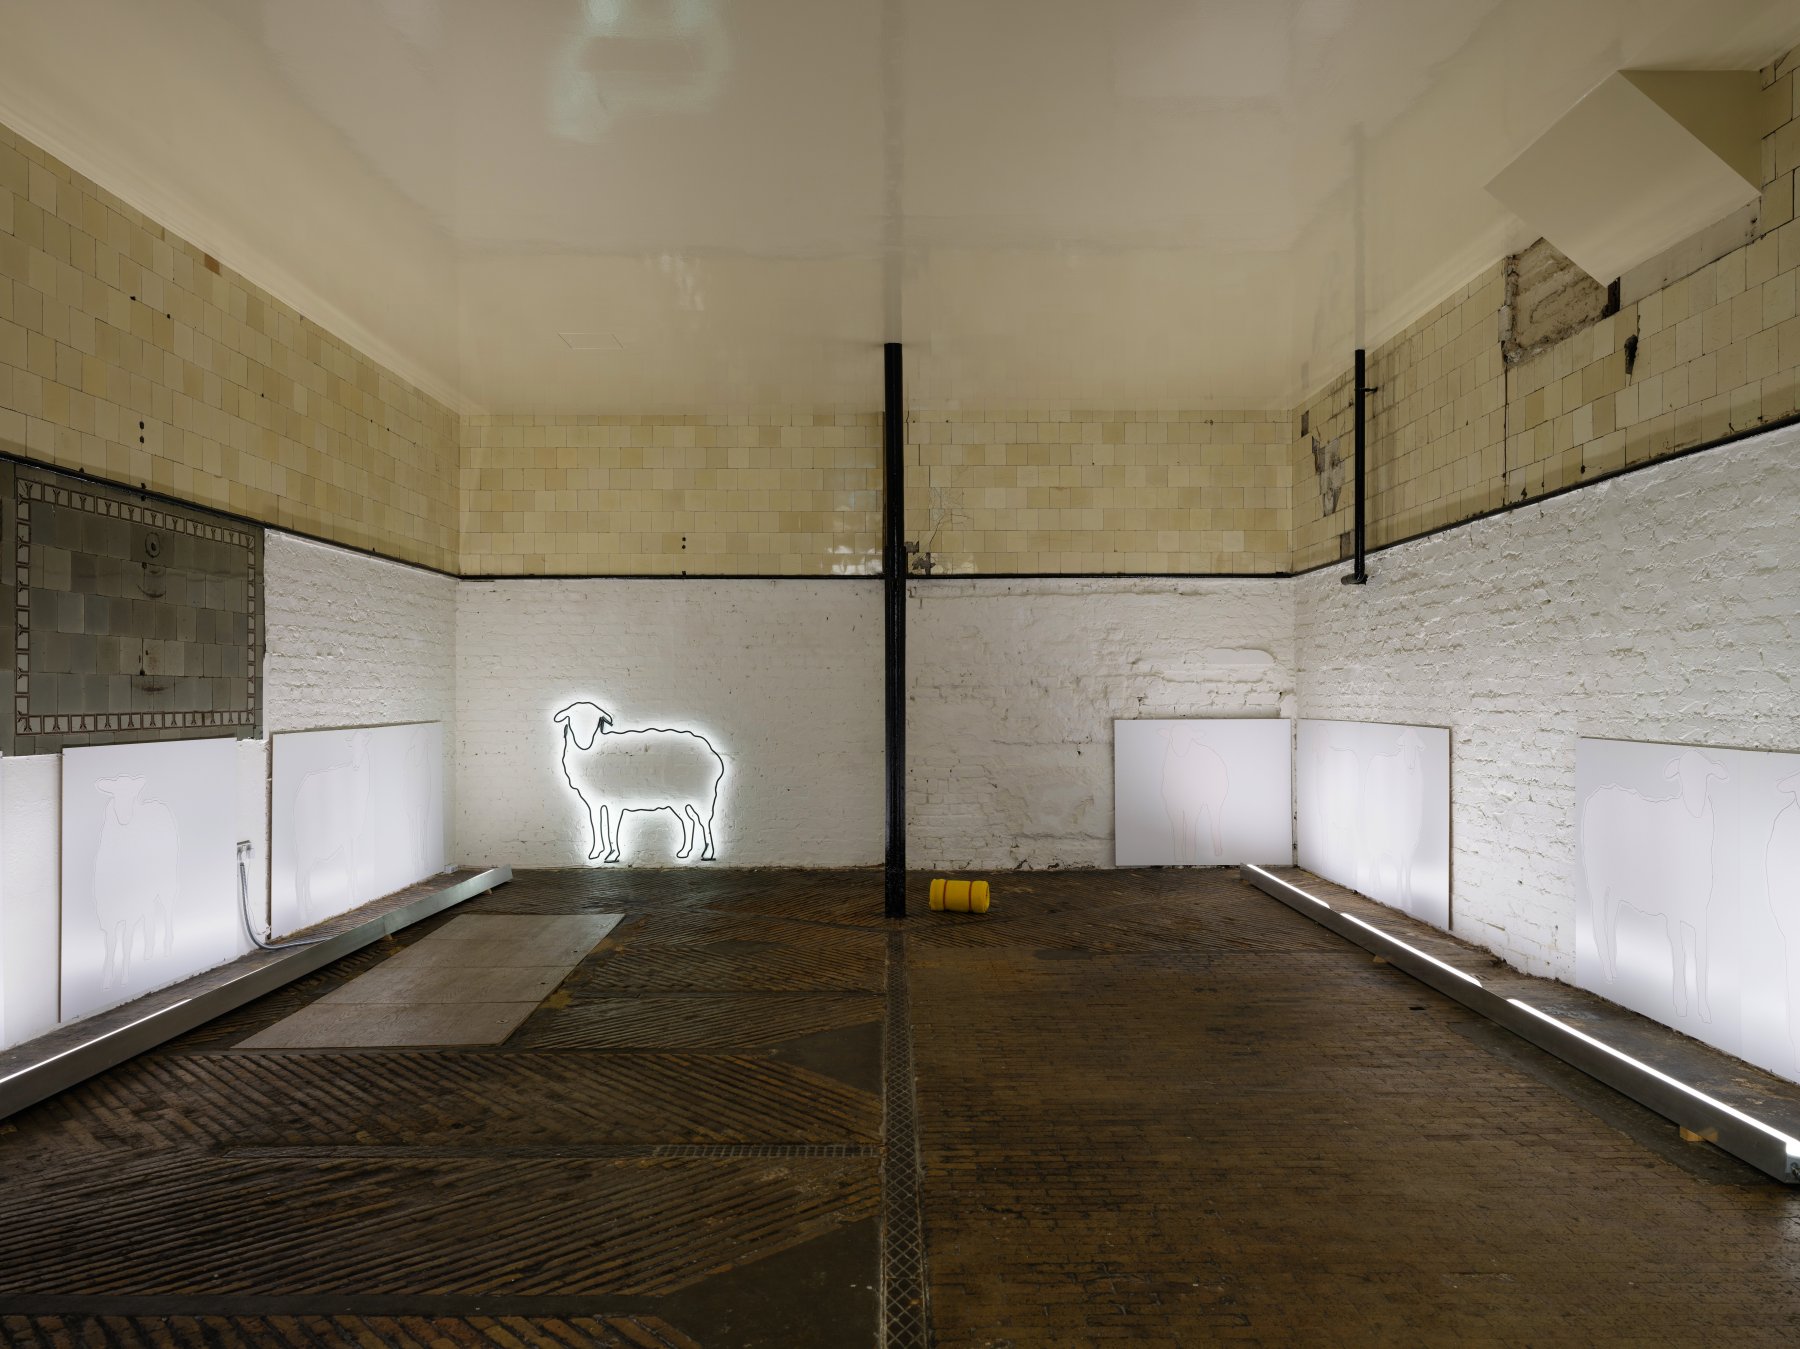 Installation image for Liliana Moro: In No Time, at Rodeo